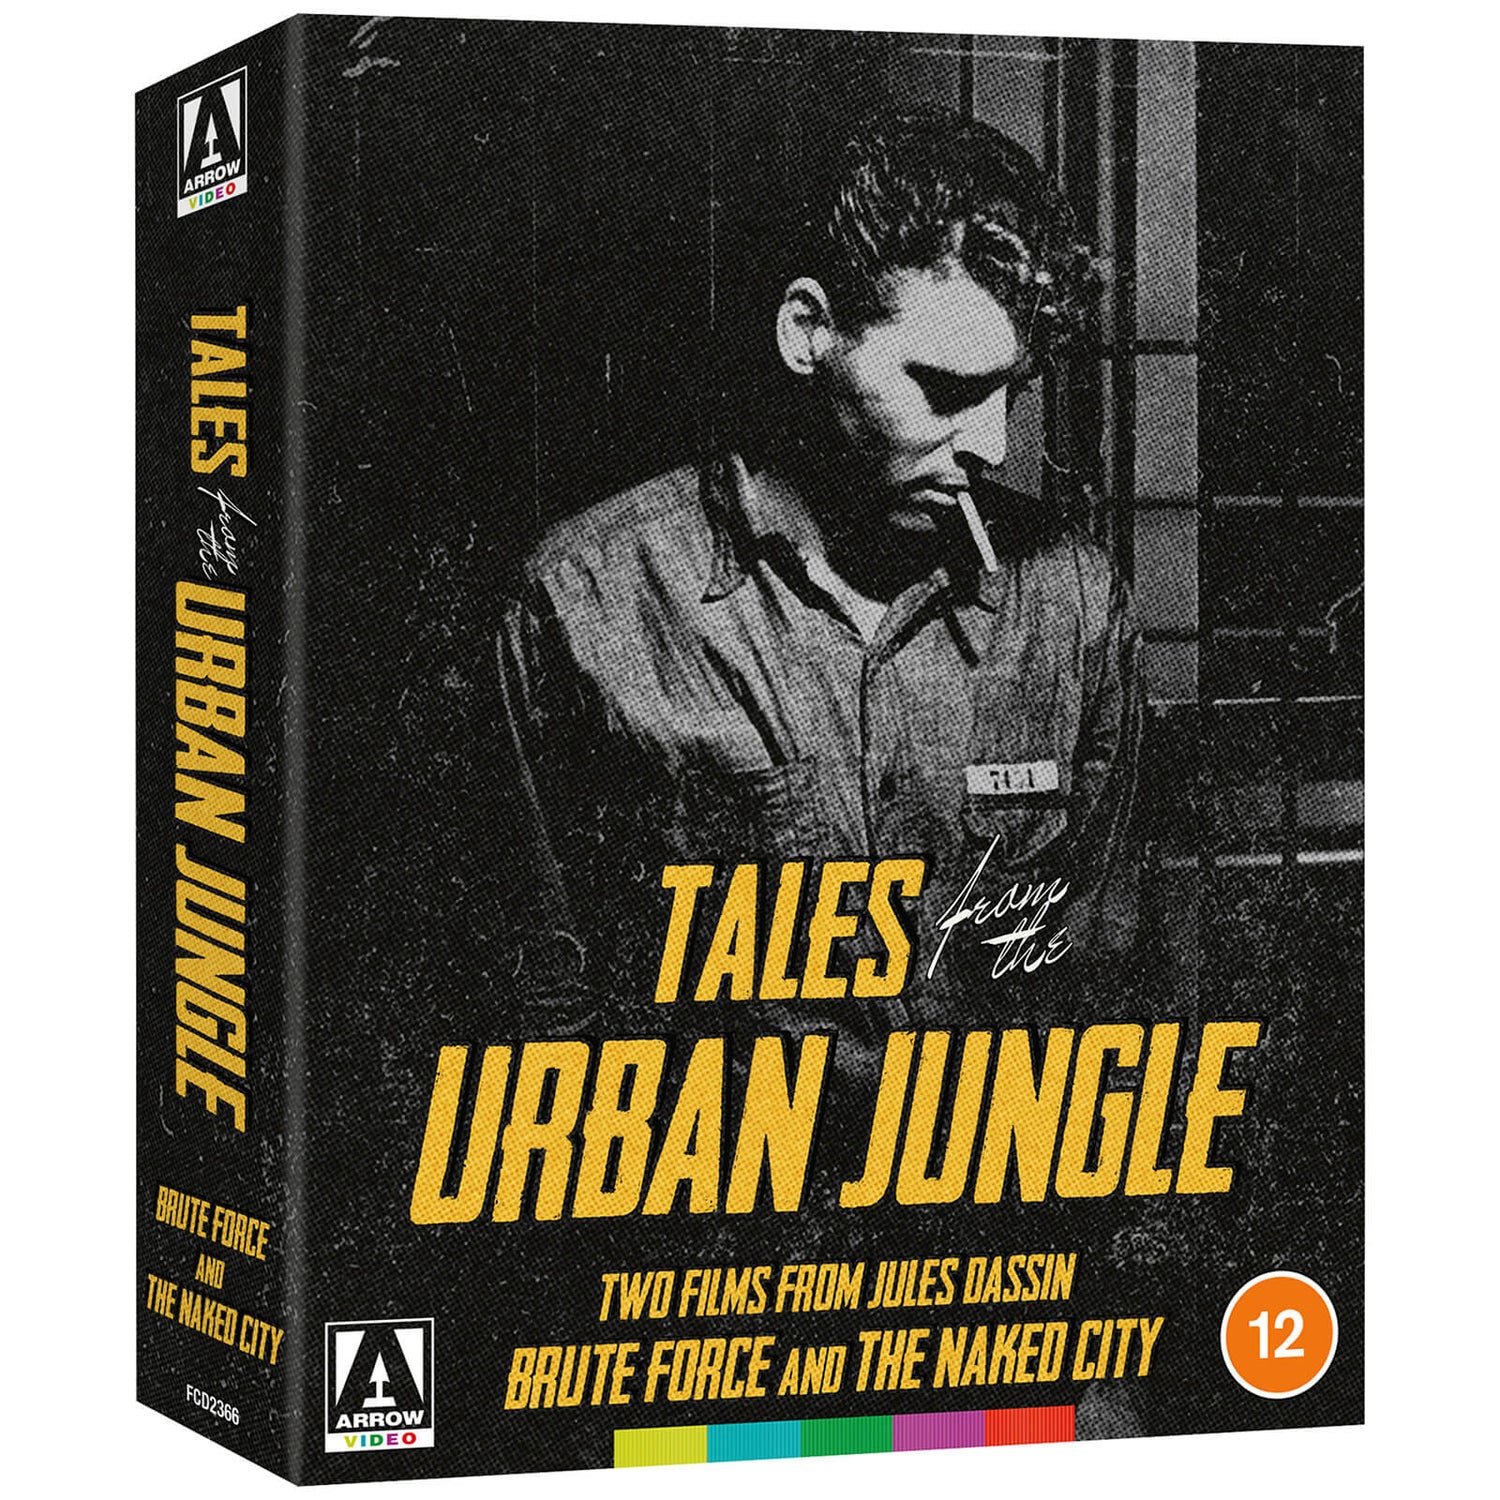 Tales From the Urban Jungle